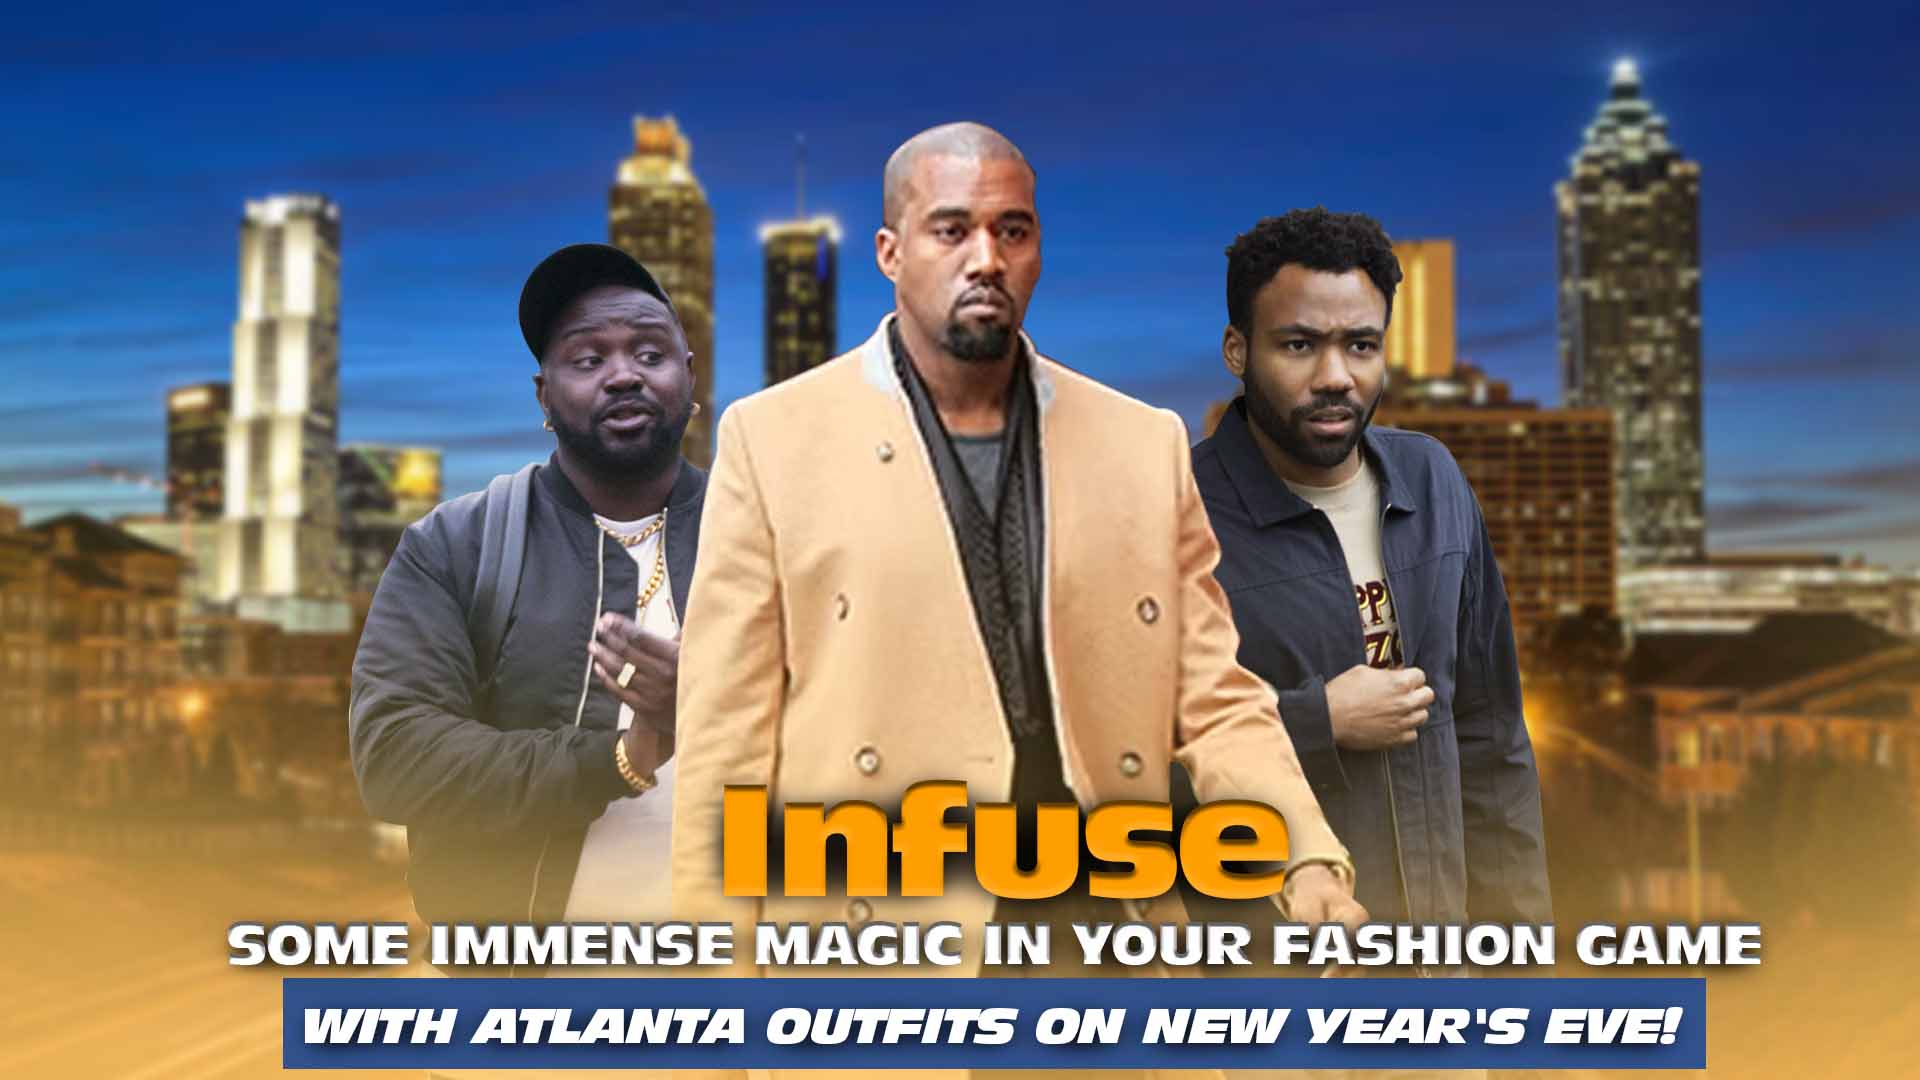 INFUSE SOME IMMENSE MAGIC IN YOUR FASHION GAME WITH ATLANTA OUTFITS ON NEW YEAR'S EVE!